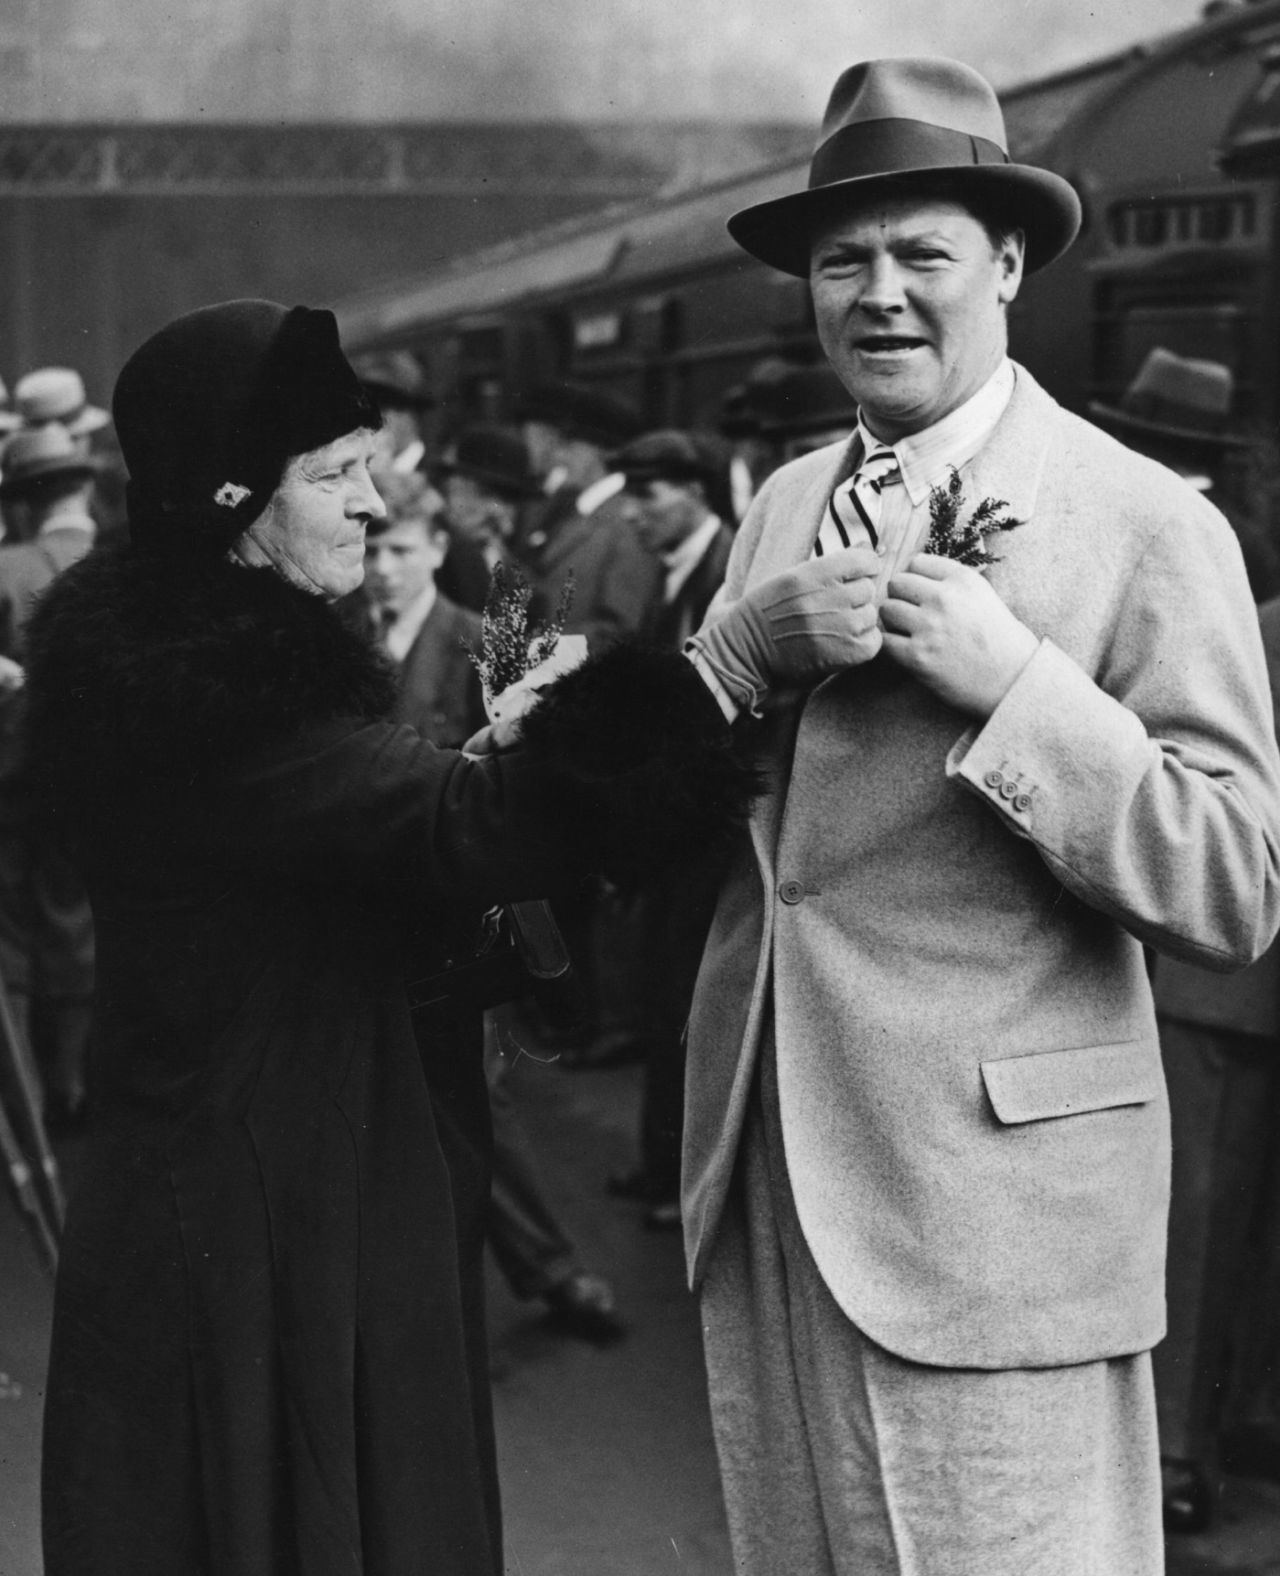 England captain Percy Chapman receives a sprig of "lucky" heather from his mother before leaving for the tour of South Africa, October 16, 1930